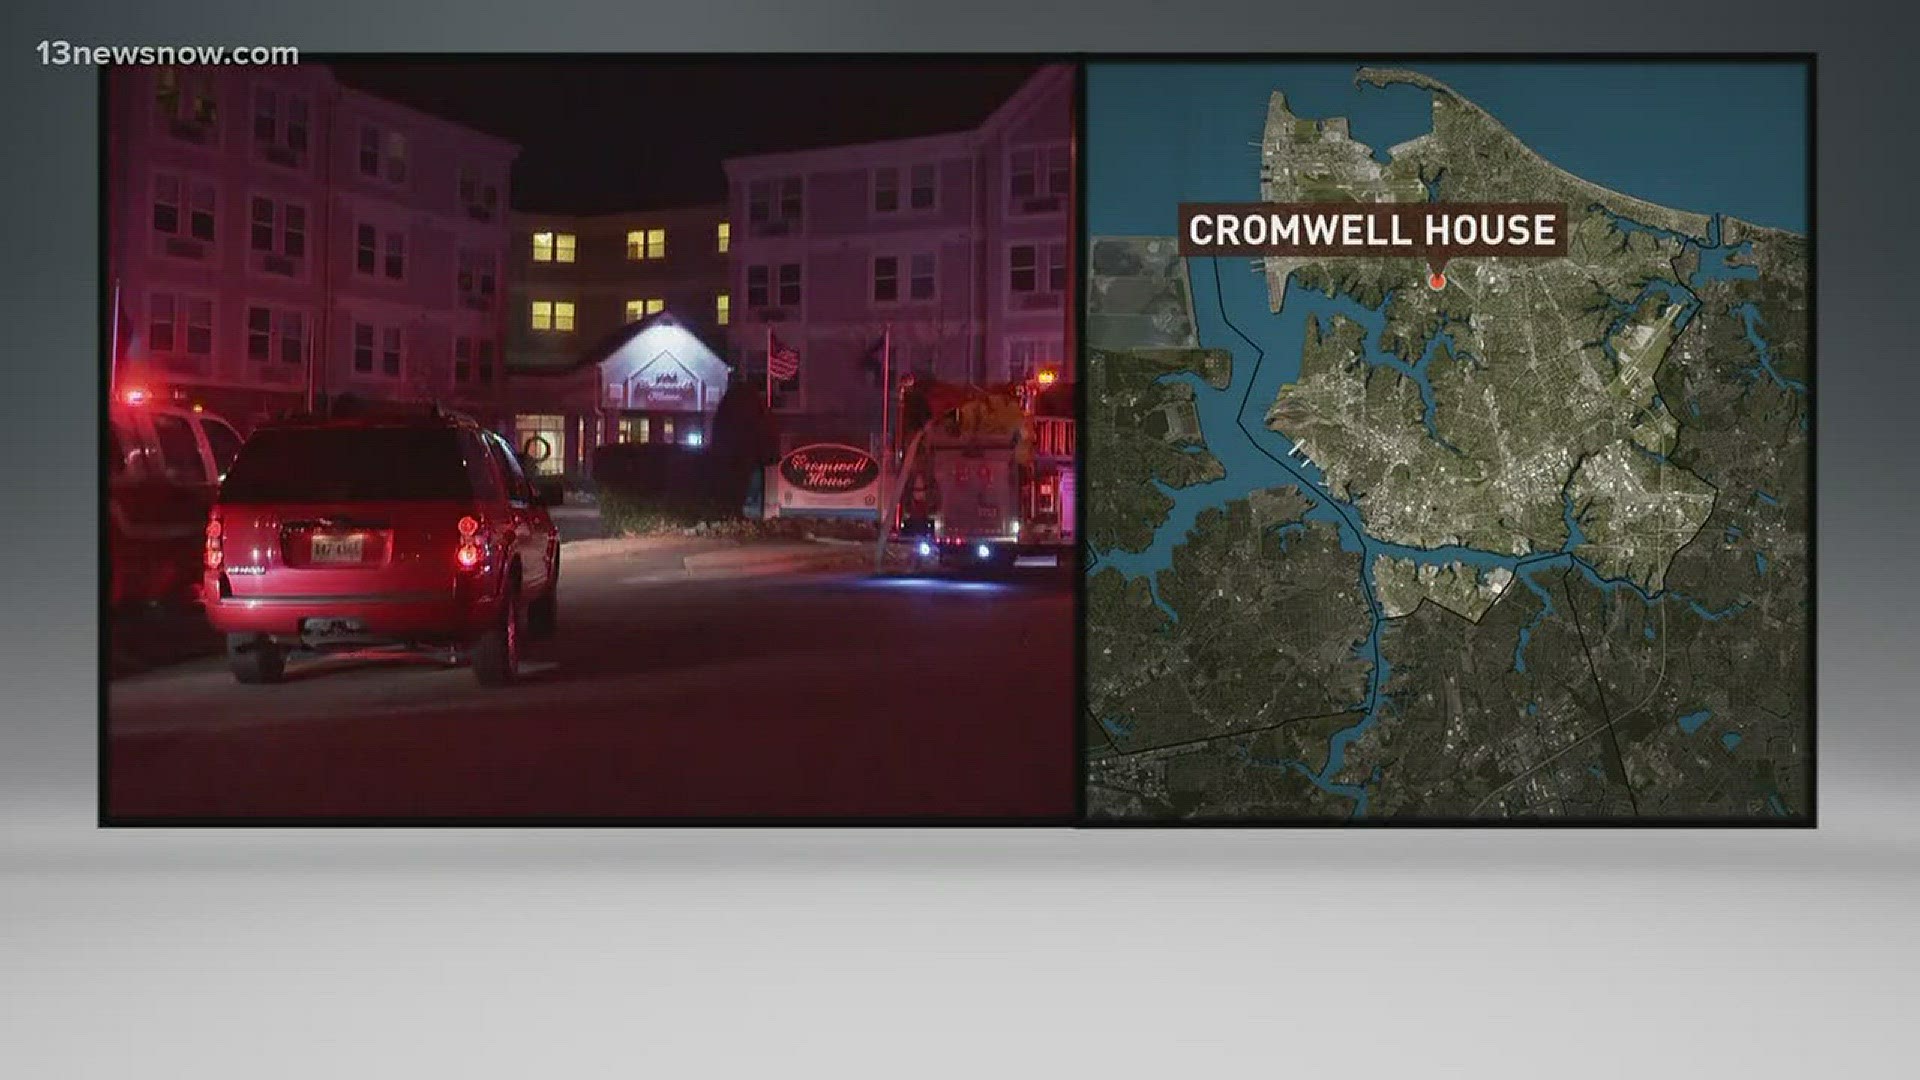 Firefighters said they were called to the Cromwell House after a small fire started on the second floor.